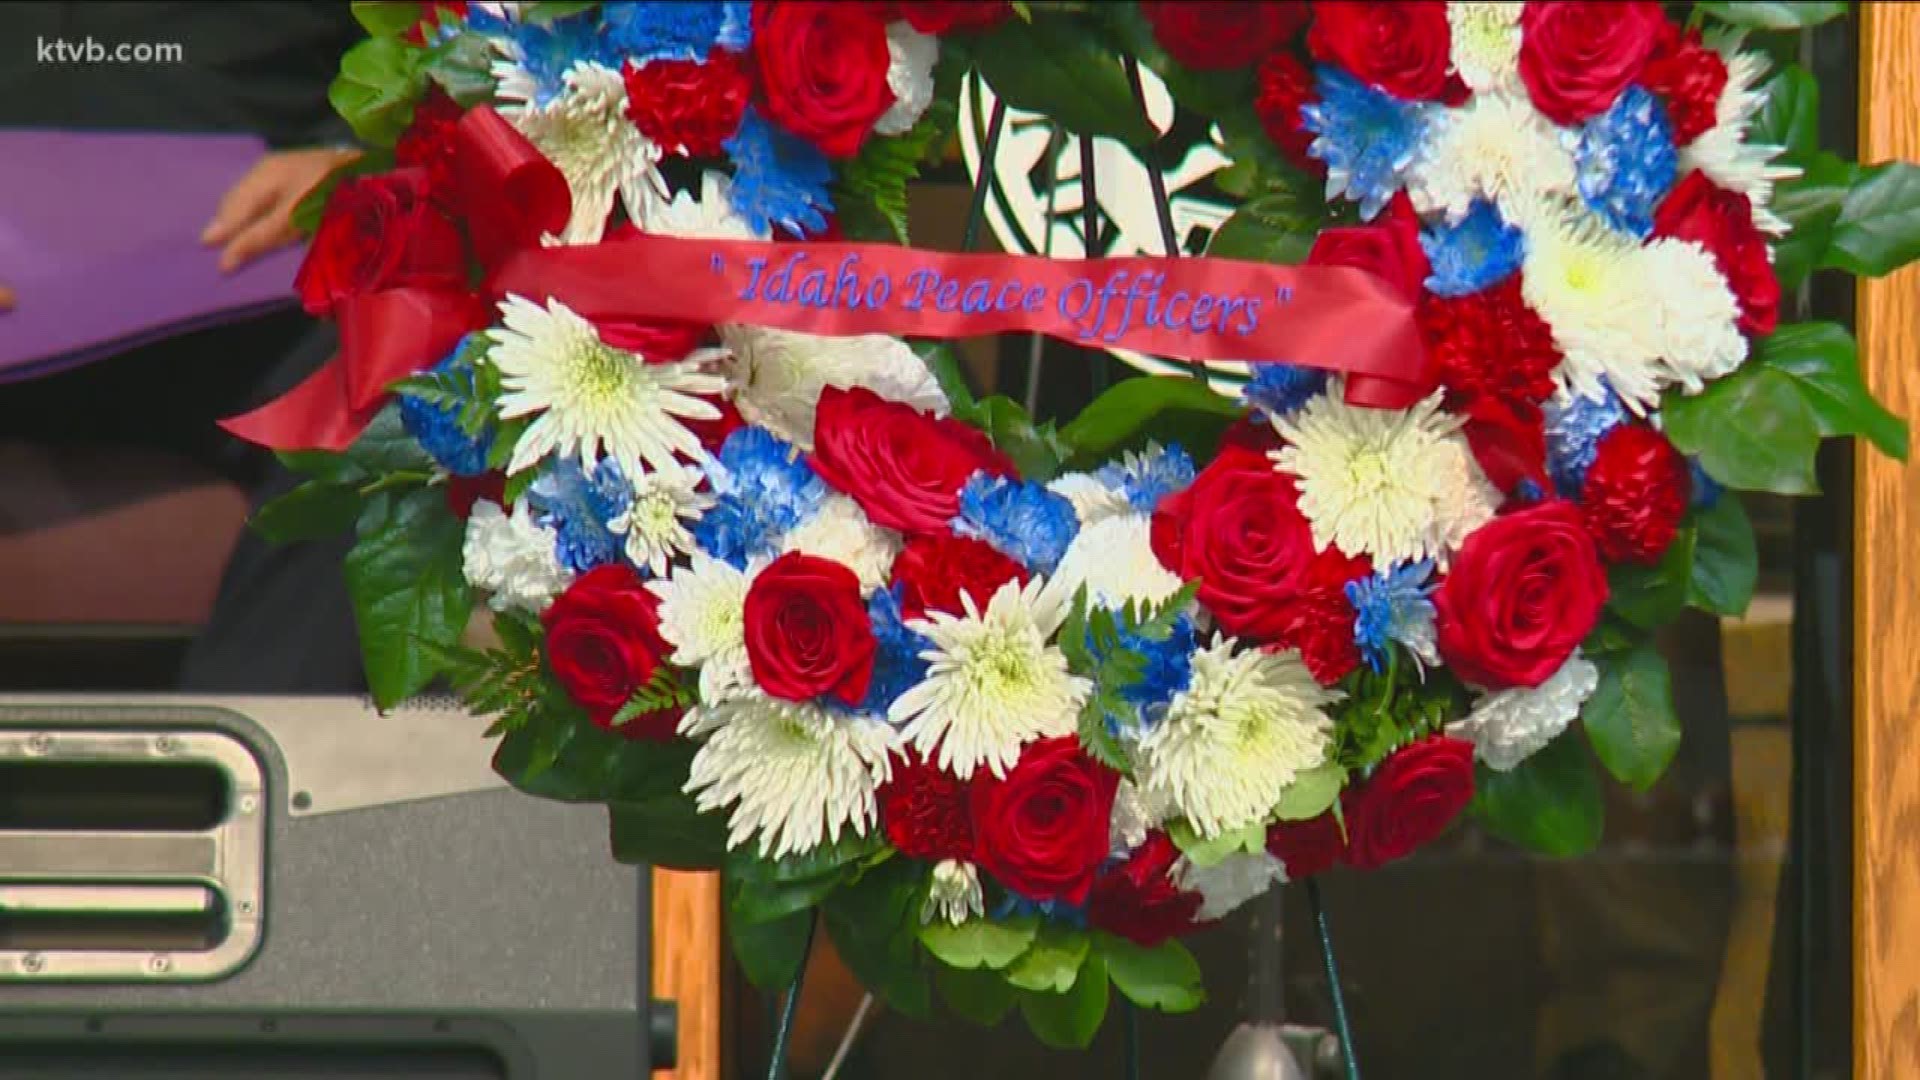 All 72 Idaho officers that lost their lives in the line of duty were remembered Friday.